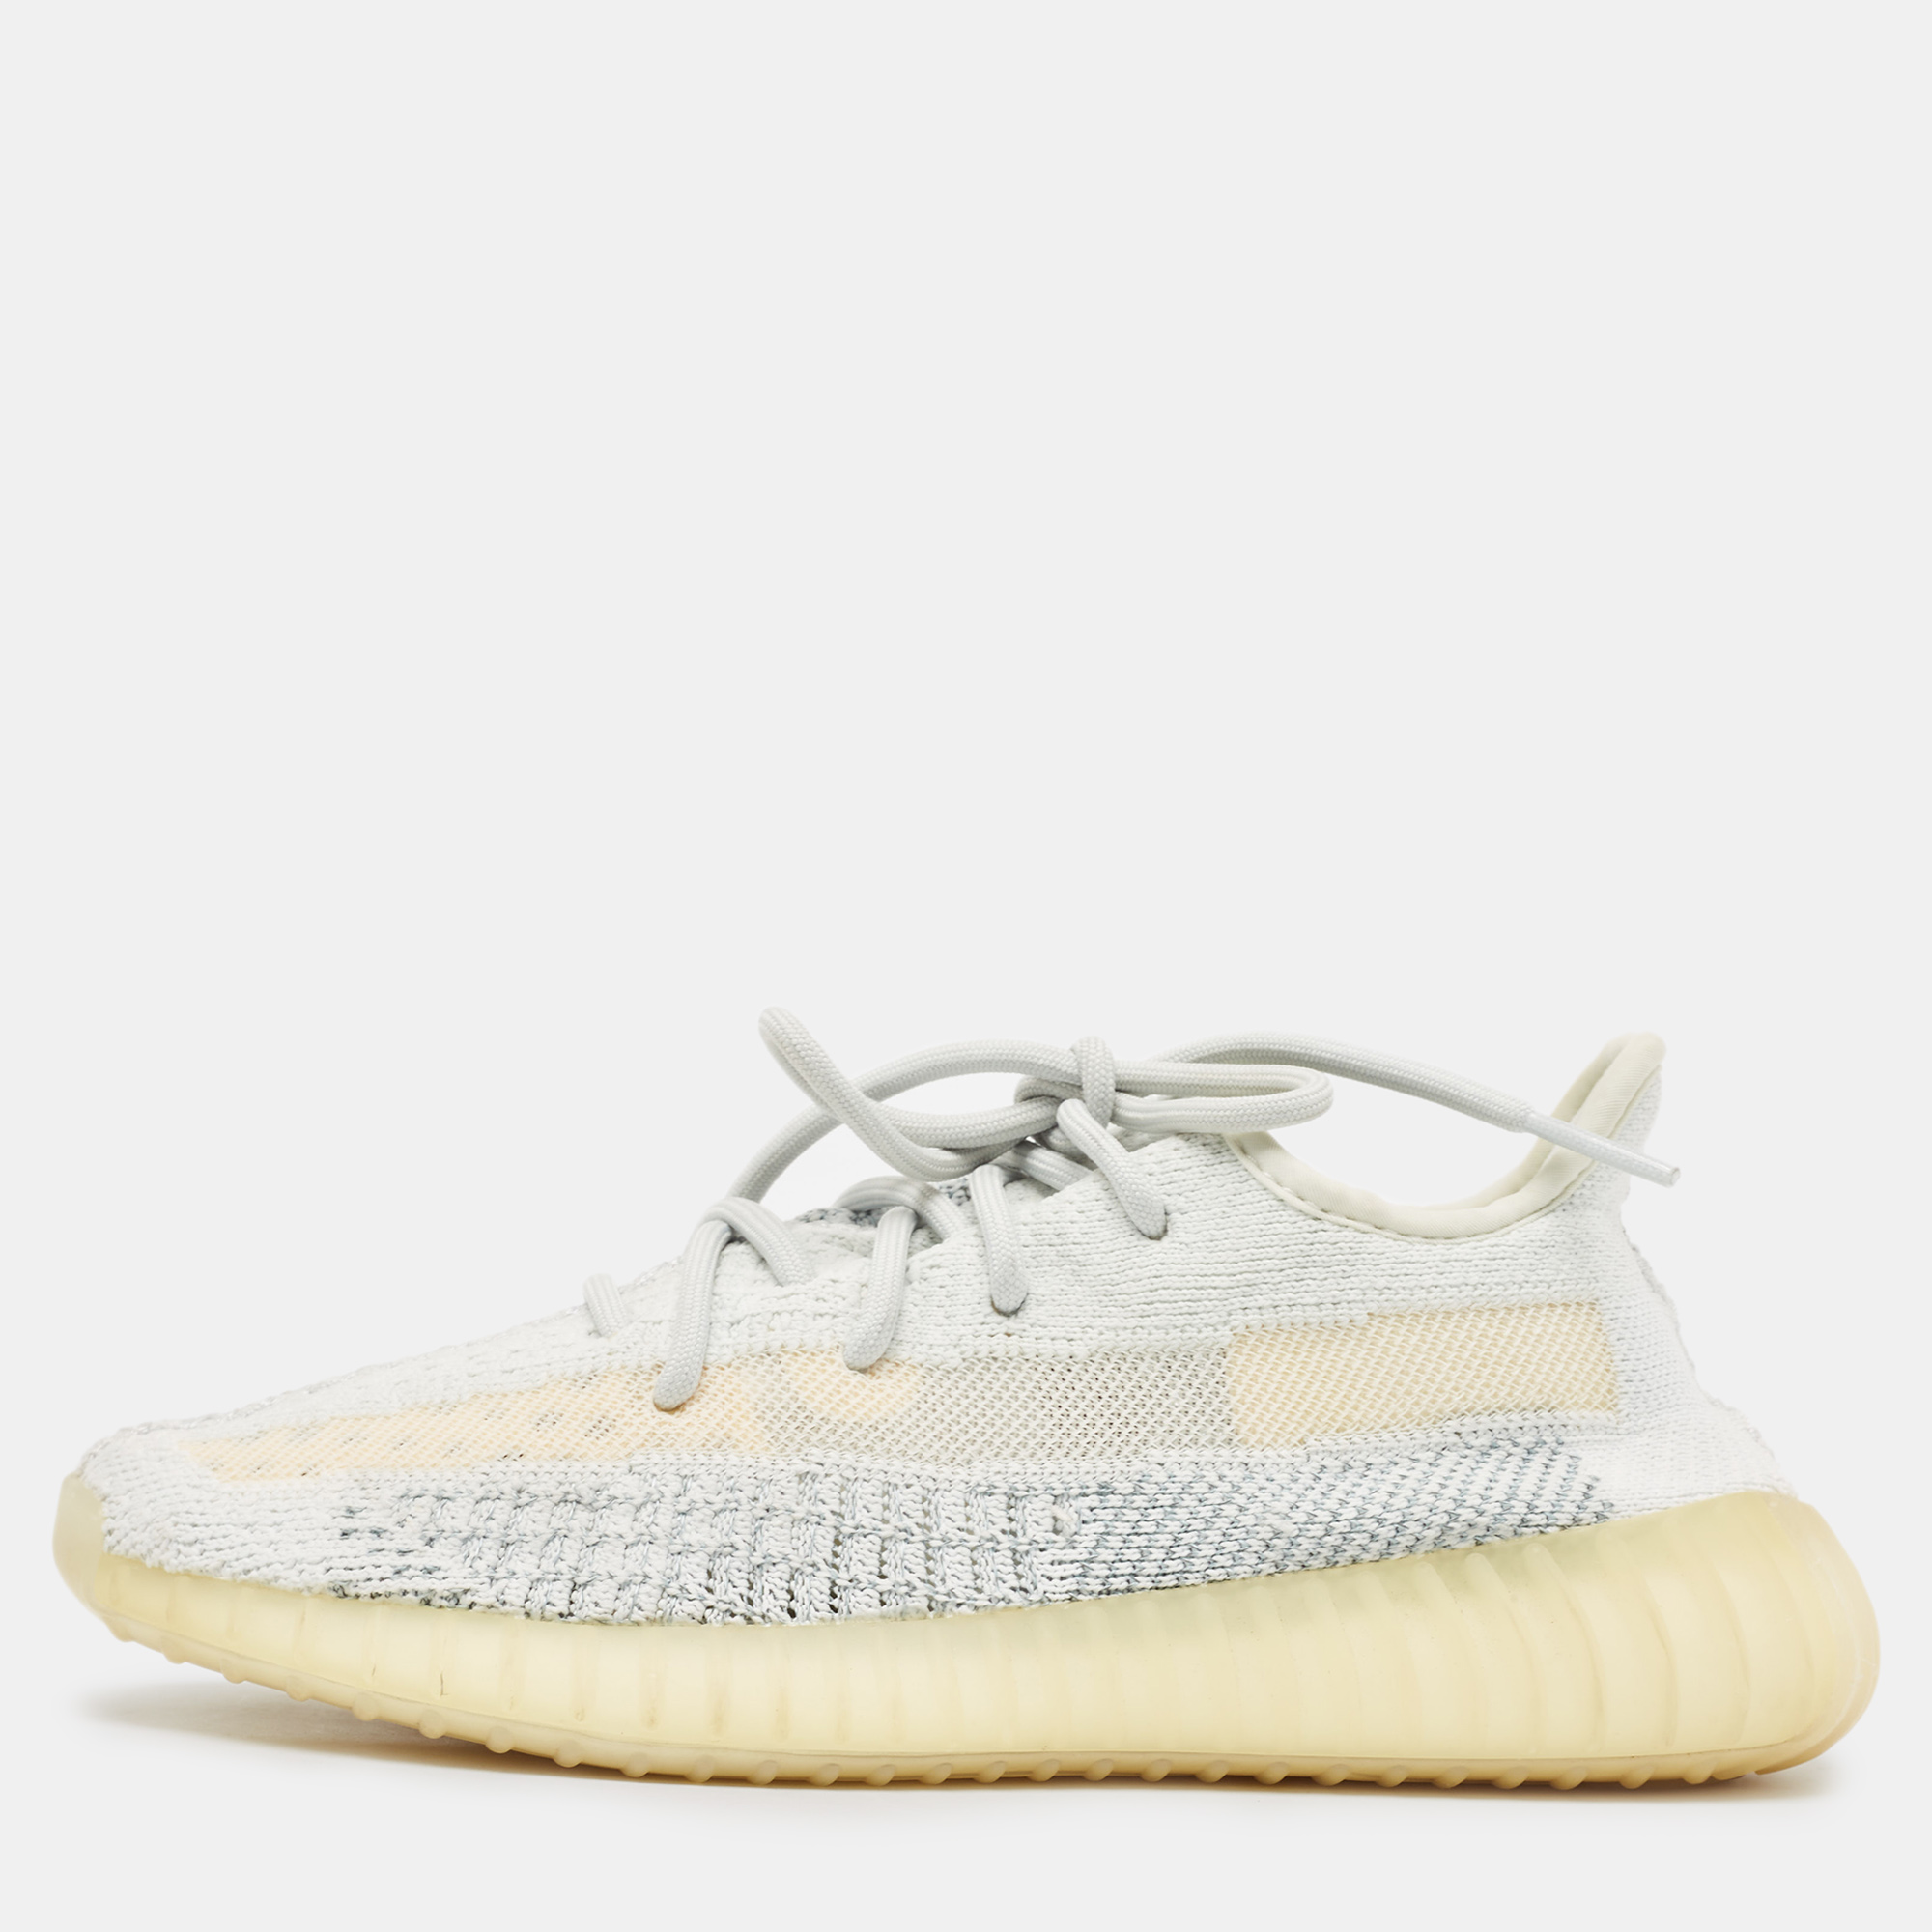 

Yeezy x Adidas White/Grey Knit Fabric Boost 350 V2 Cloud White Reflective Sneakers Size 39 1/3